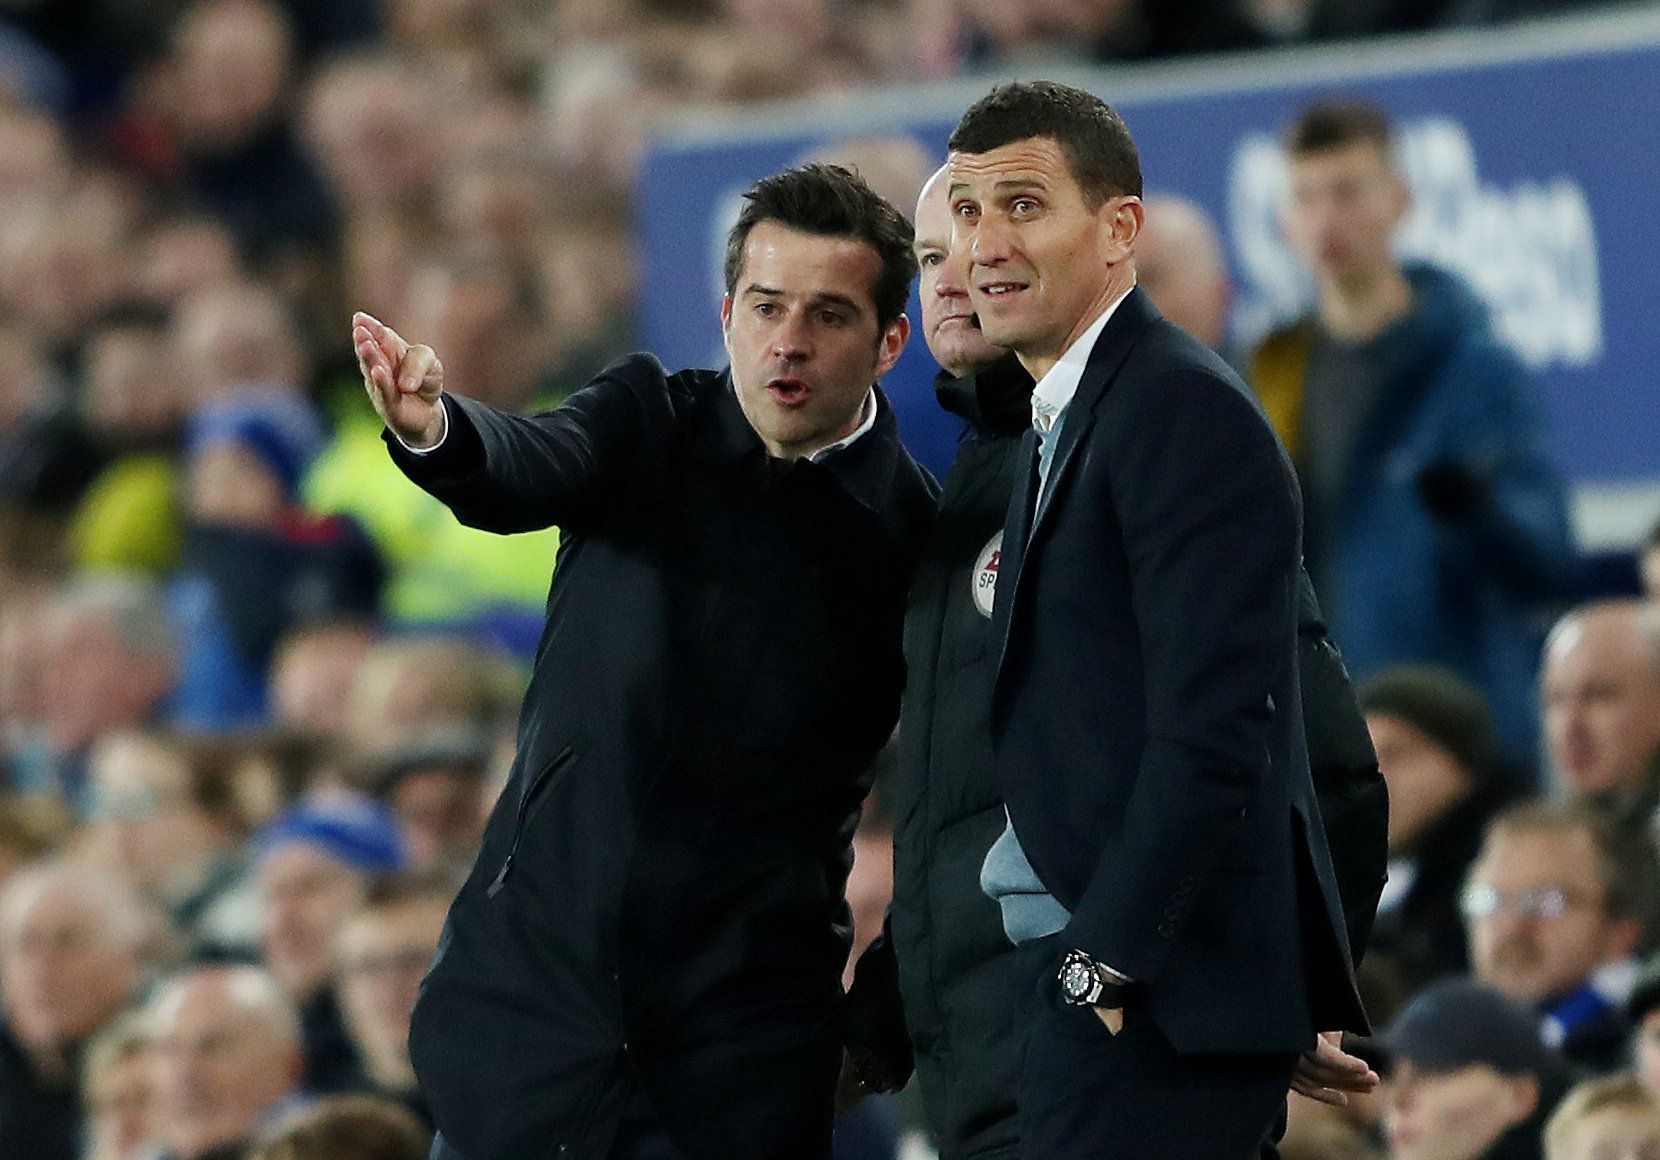 Soccer Football - Premier League - Everton v Watford - Goodison Park, Liverpool, Britain - December 10, 2018   Watford manager Javi Gracia and Everton manager Marco Silva             Action Images via Reuters/Lee Smith    EDITORIAL USE ONLY. No use with unauthorized audio, video, data, fixture lists, club/league logos or 